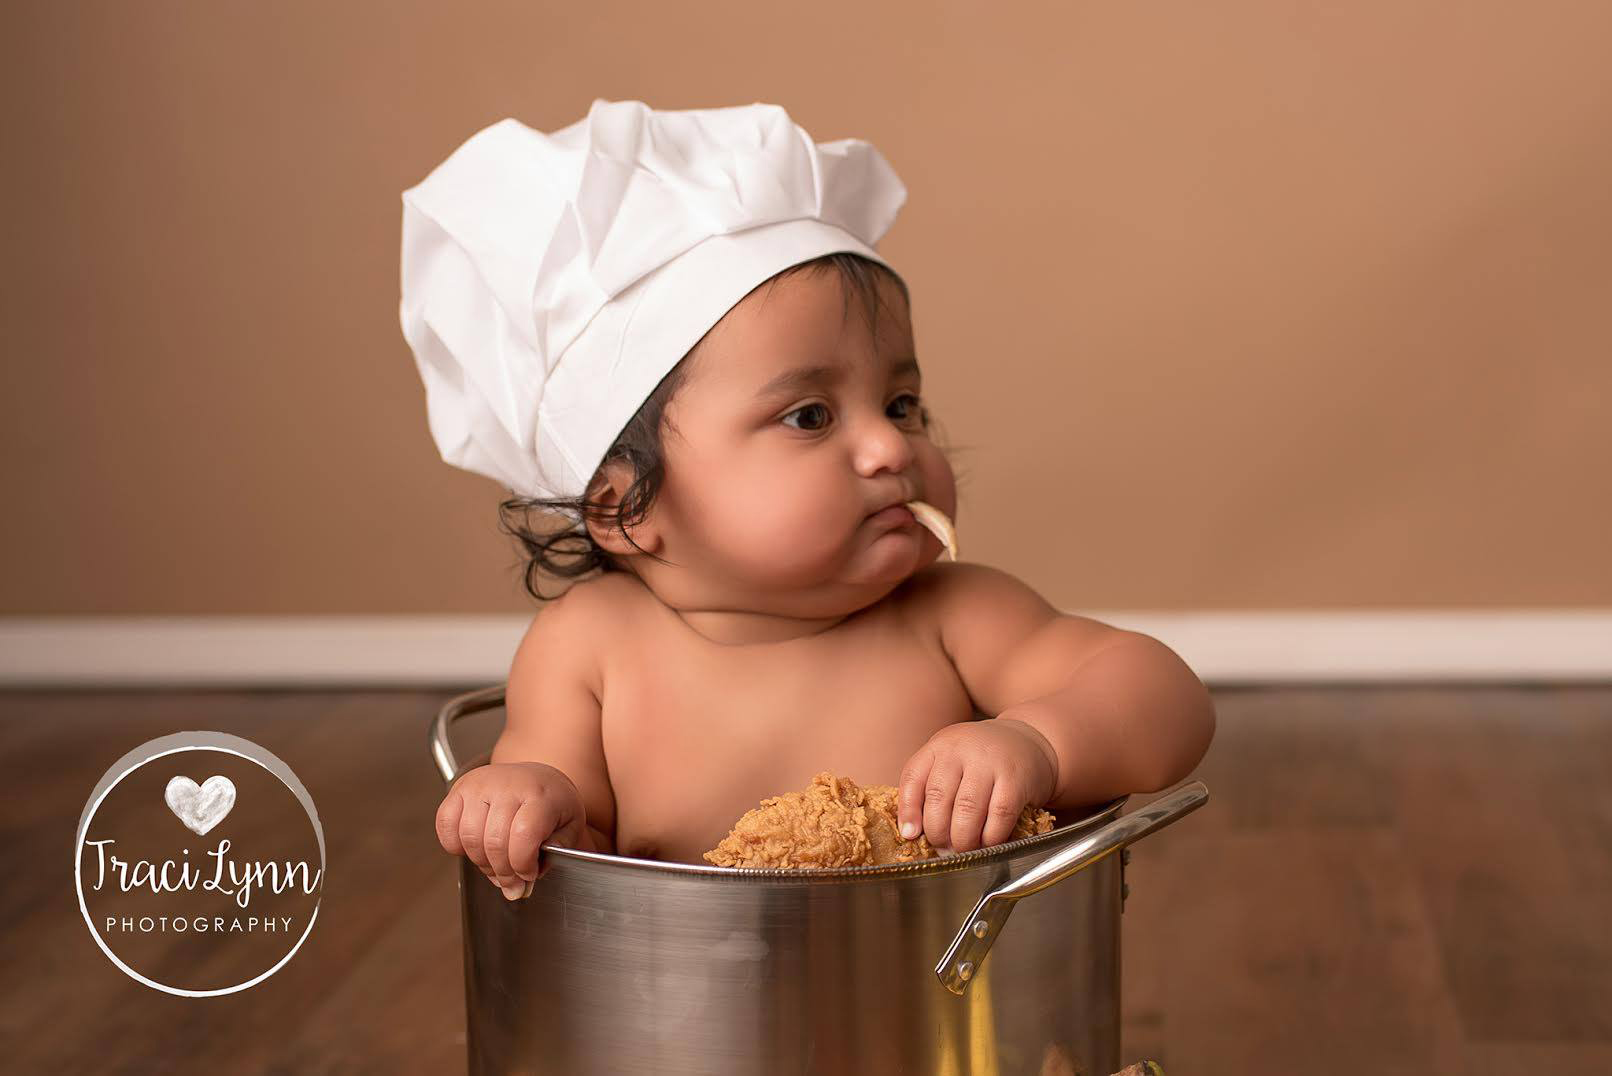 PHOTO: 8-month old Johnny Garcia had a foodie-themed photo shoot to celebrate his love of food.  